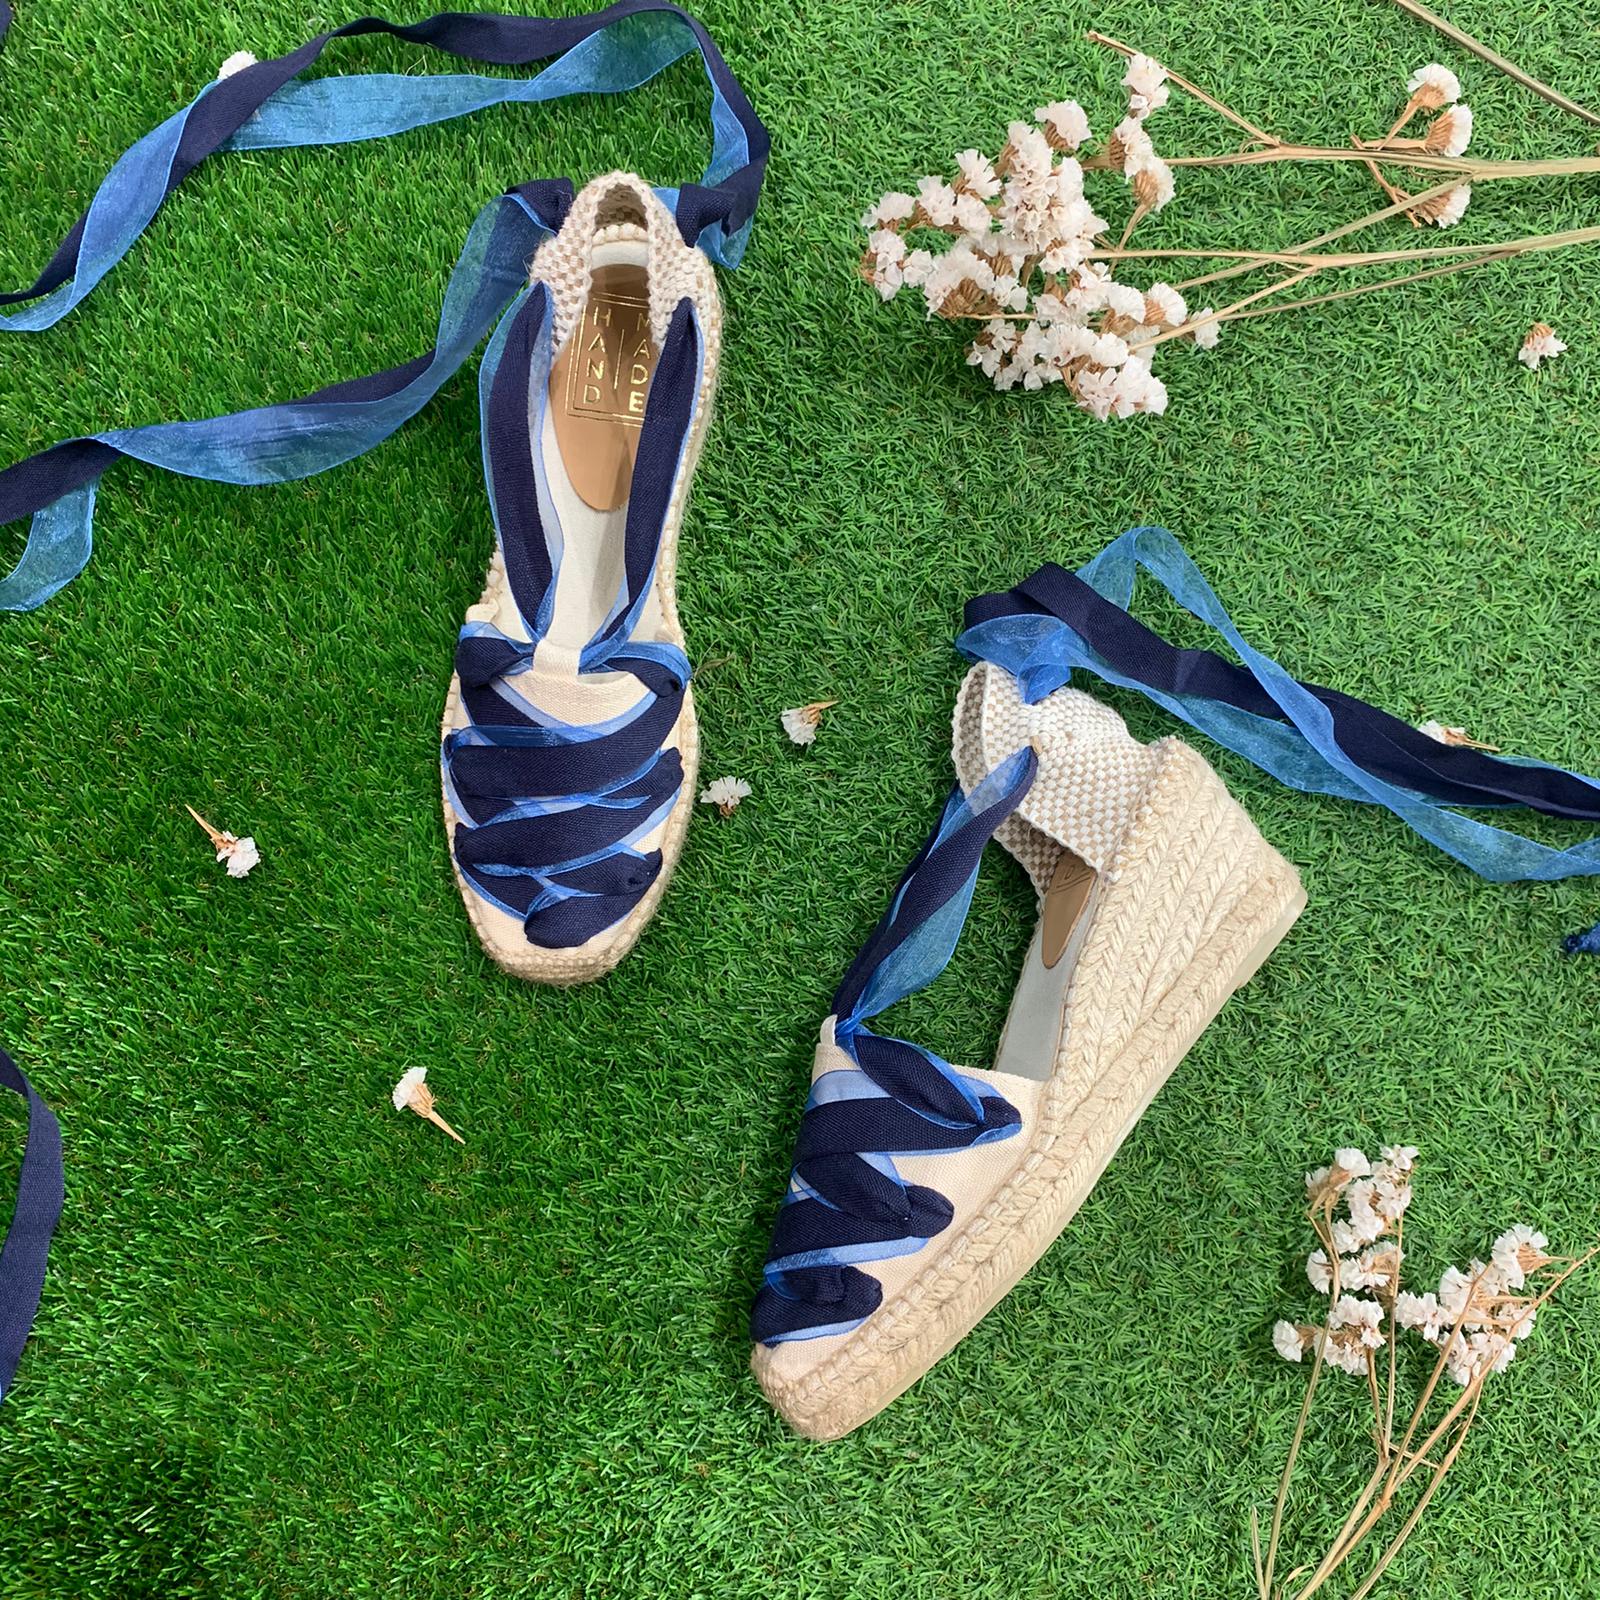 A pair of blue espadrilles on grass with ribbons.